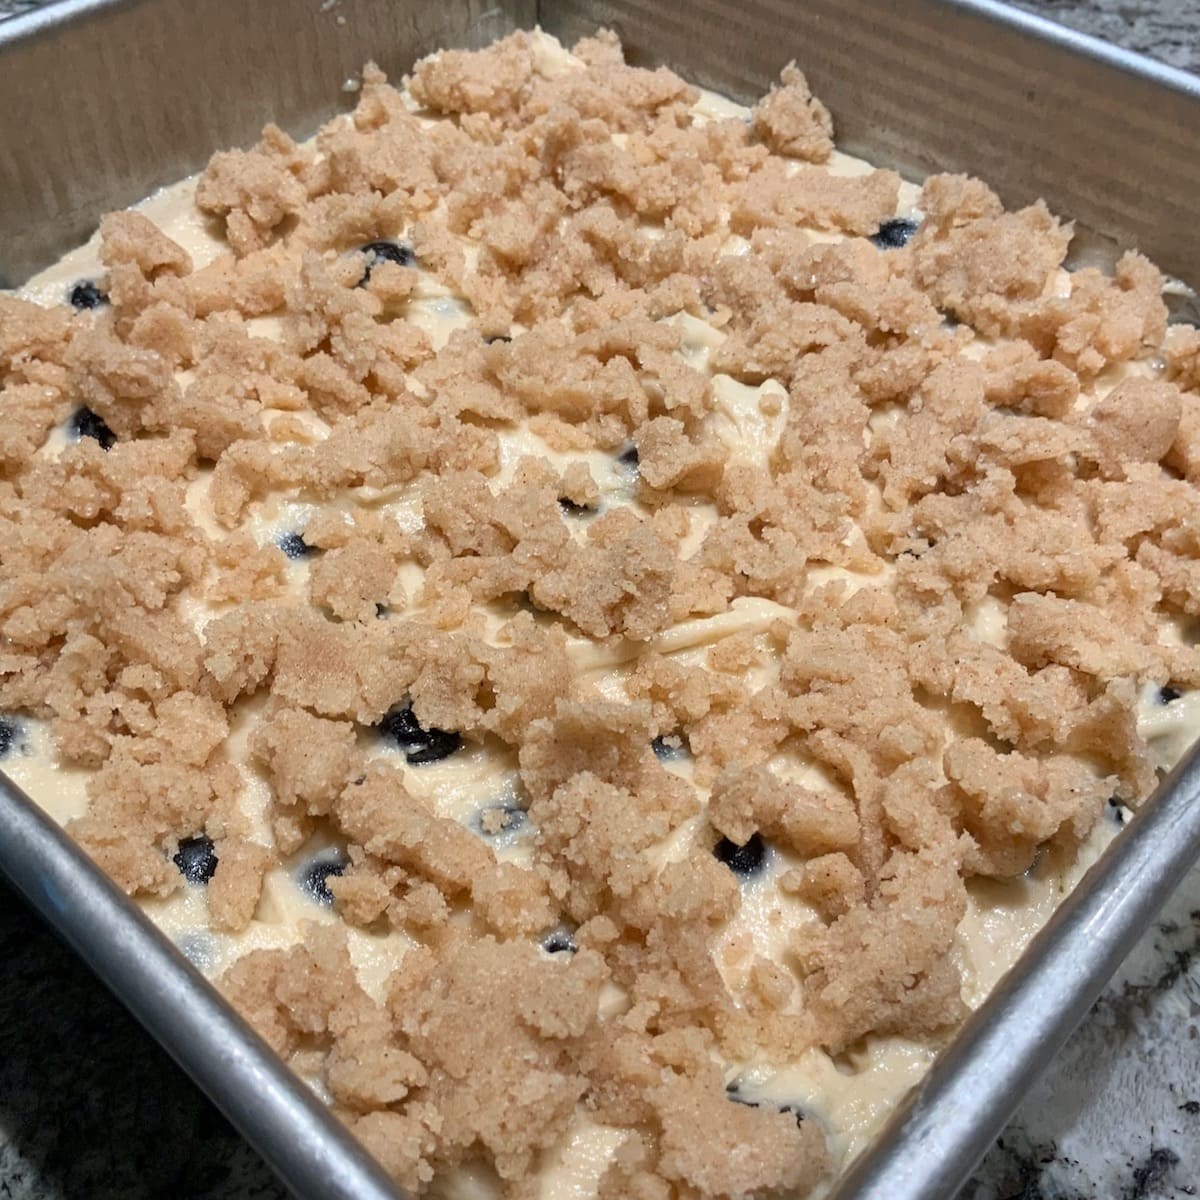 Crumb topping placed on Blueberry Crumb Cake